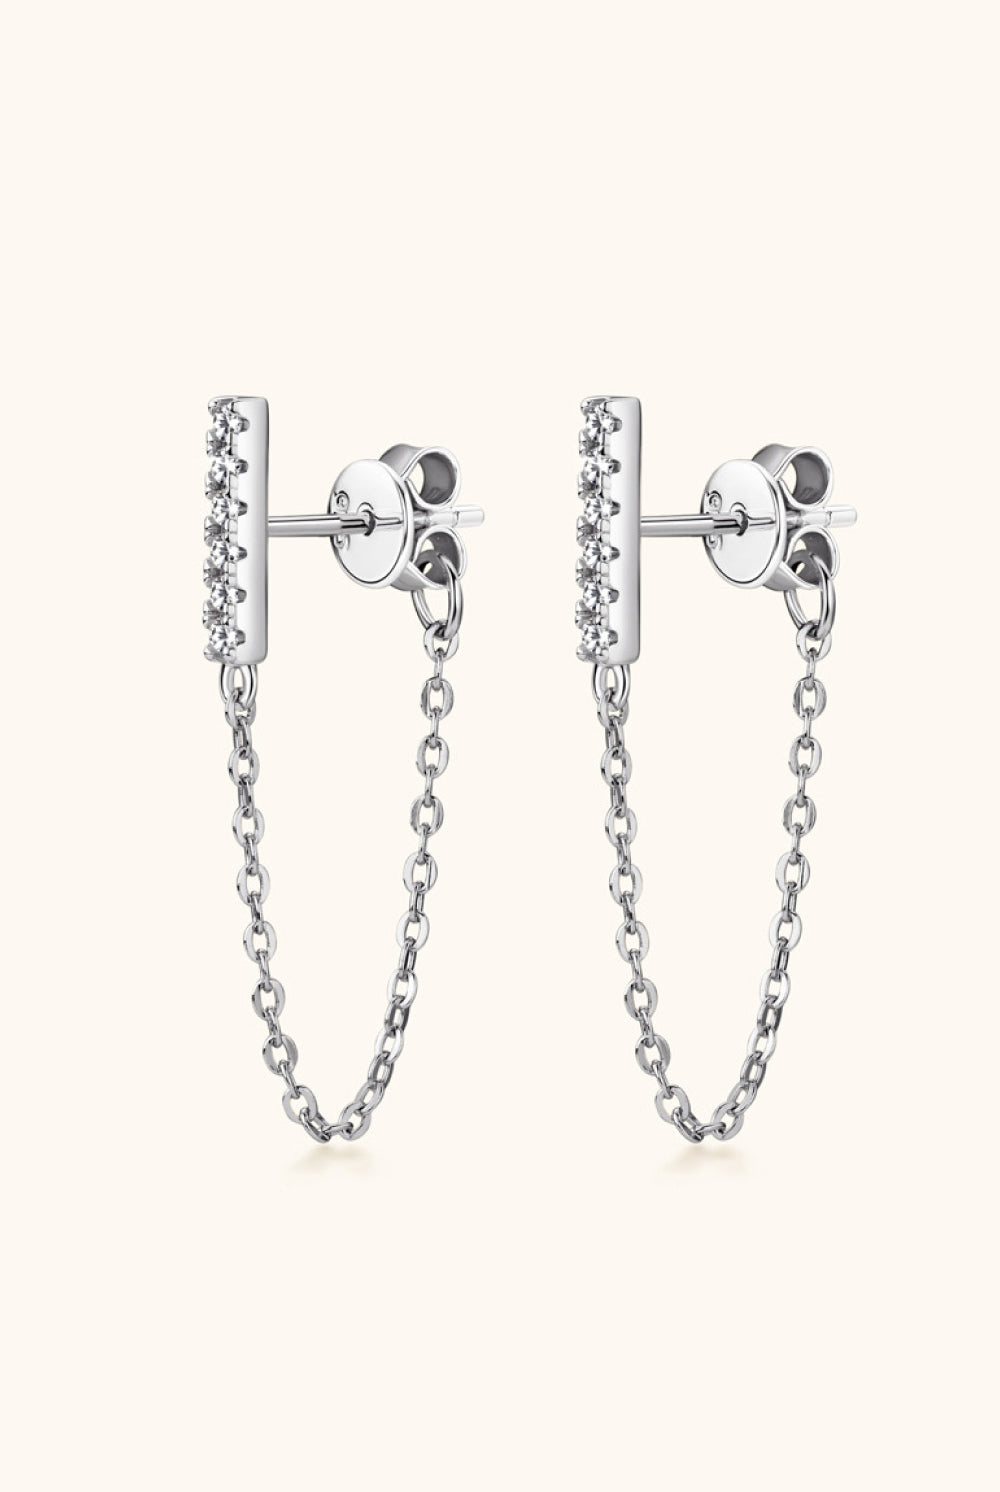 Moissanite 925 Sterling Silver Connected Earrings-Trendsi-Urban Threadz Boutique, Women's Fashion Boutique in Saugatuck, MI